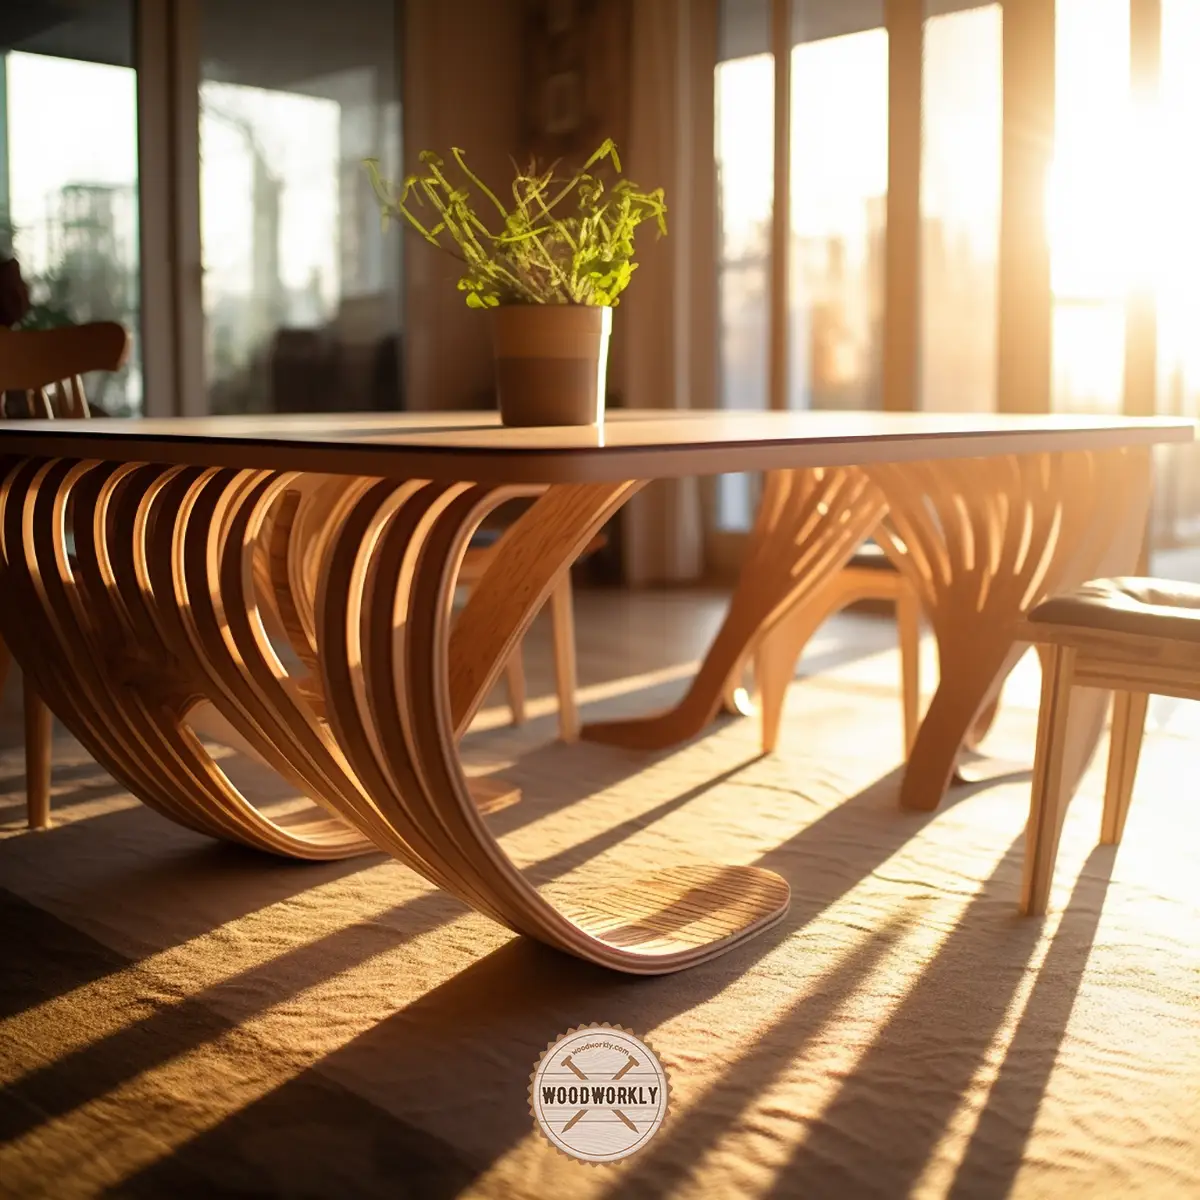 Dining table is made by bending wood pieces